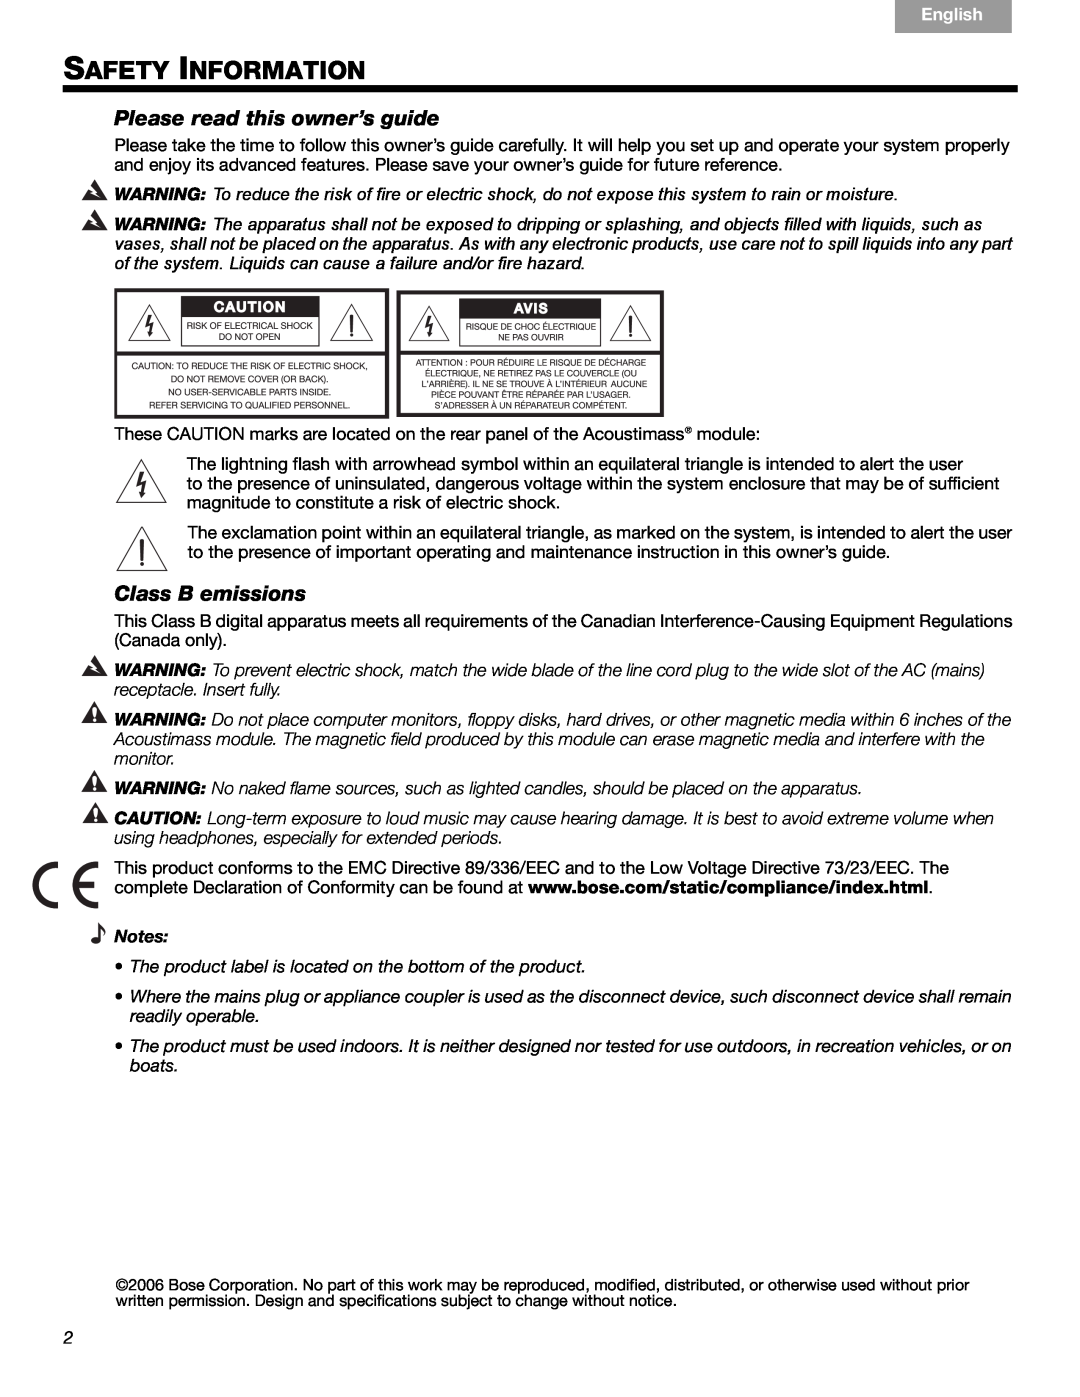 Bose 3 manual Safety Information, Please read this owner’s guide, Class B emissions, Français Español, English 